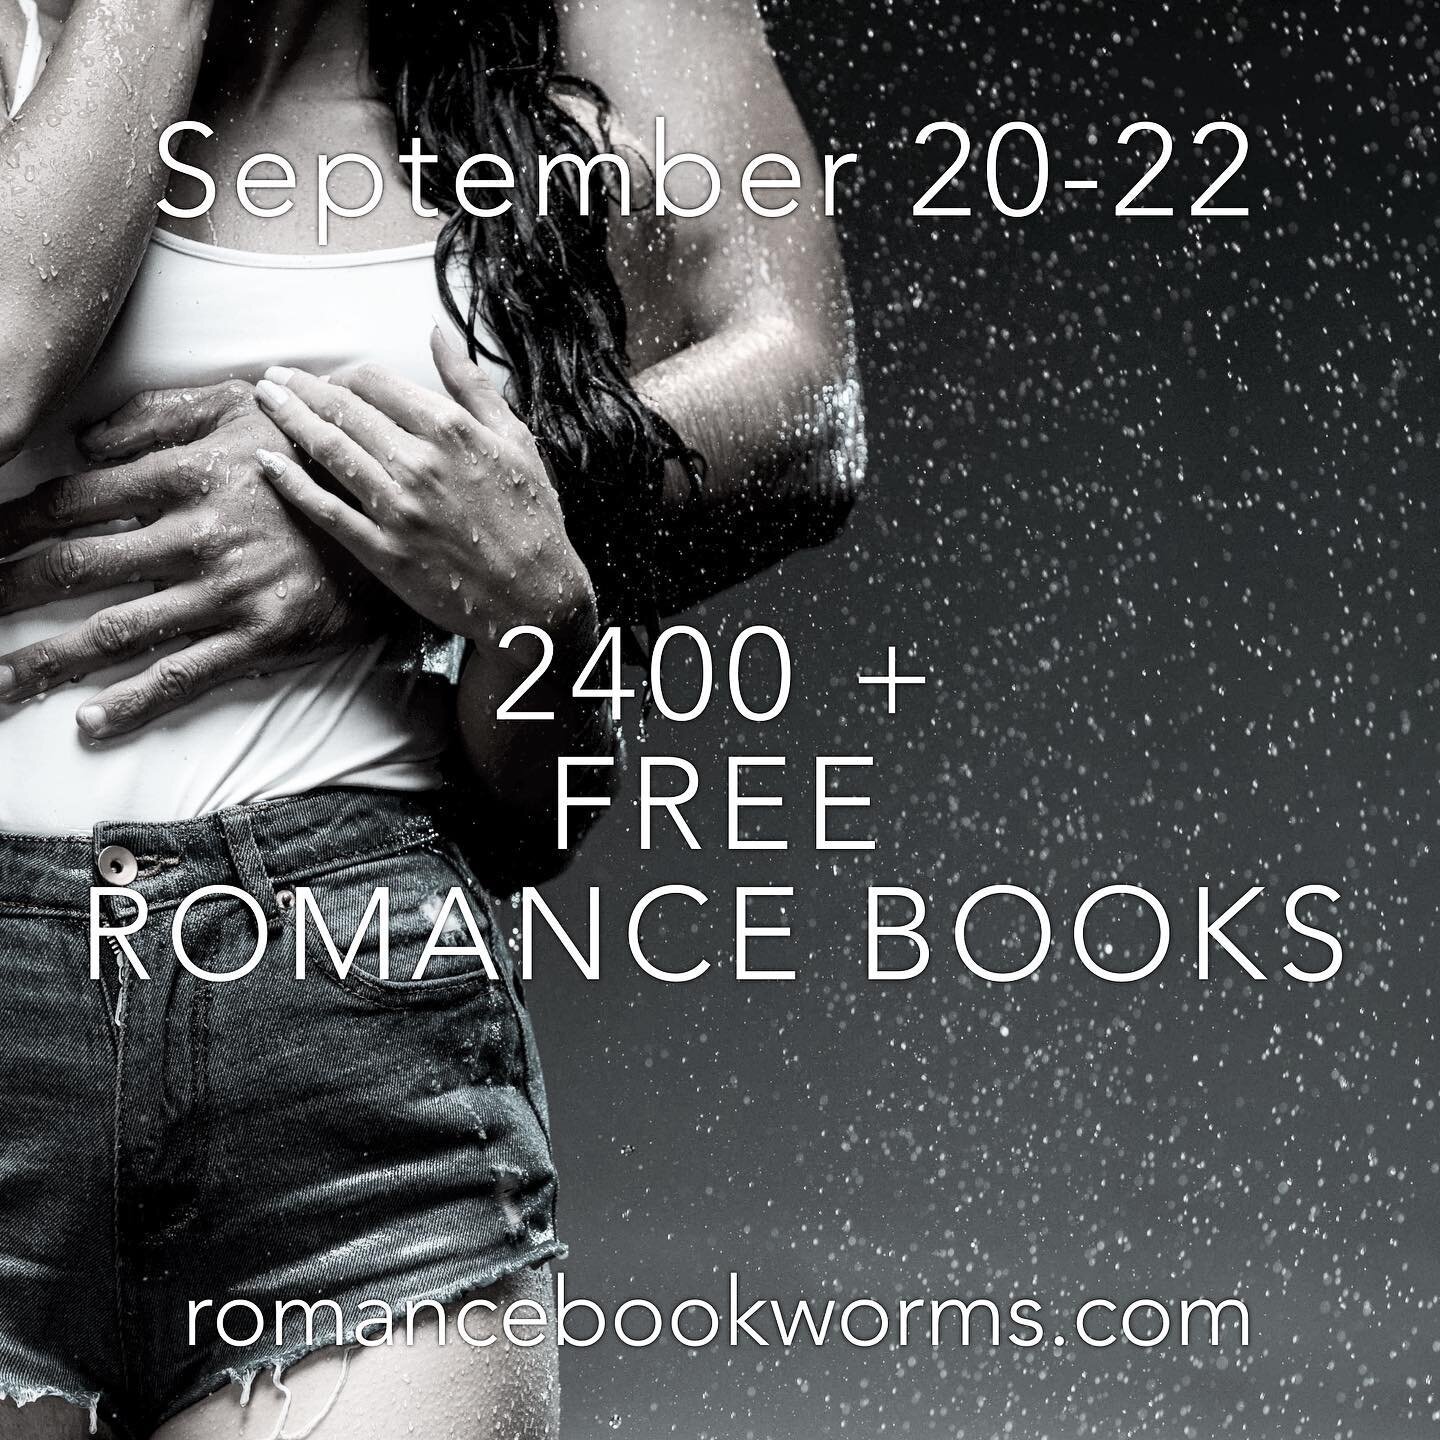 2400+ FREE romance eBooks, September 20-22. It&rsquo;s that time again where we give away over 2k romance books, including Rock Hard by yours truly (which is actually free to download until September 23 EST). No signups. No strings attached. Just lot